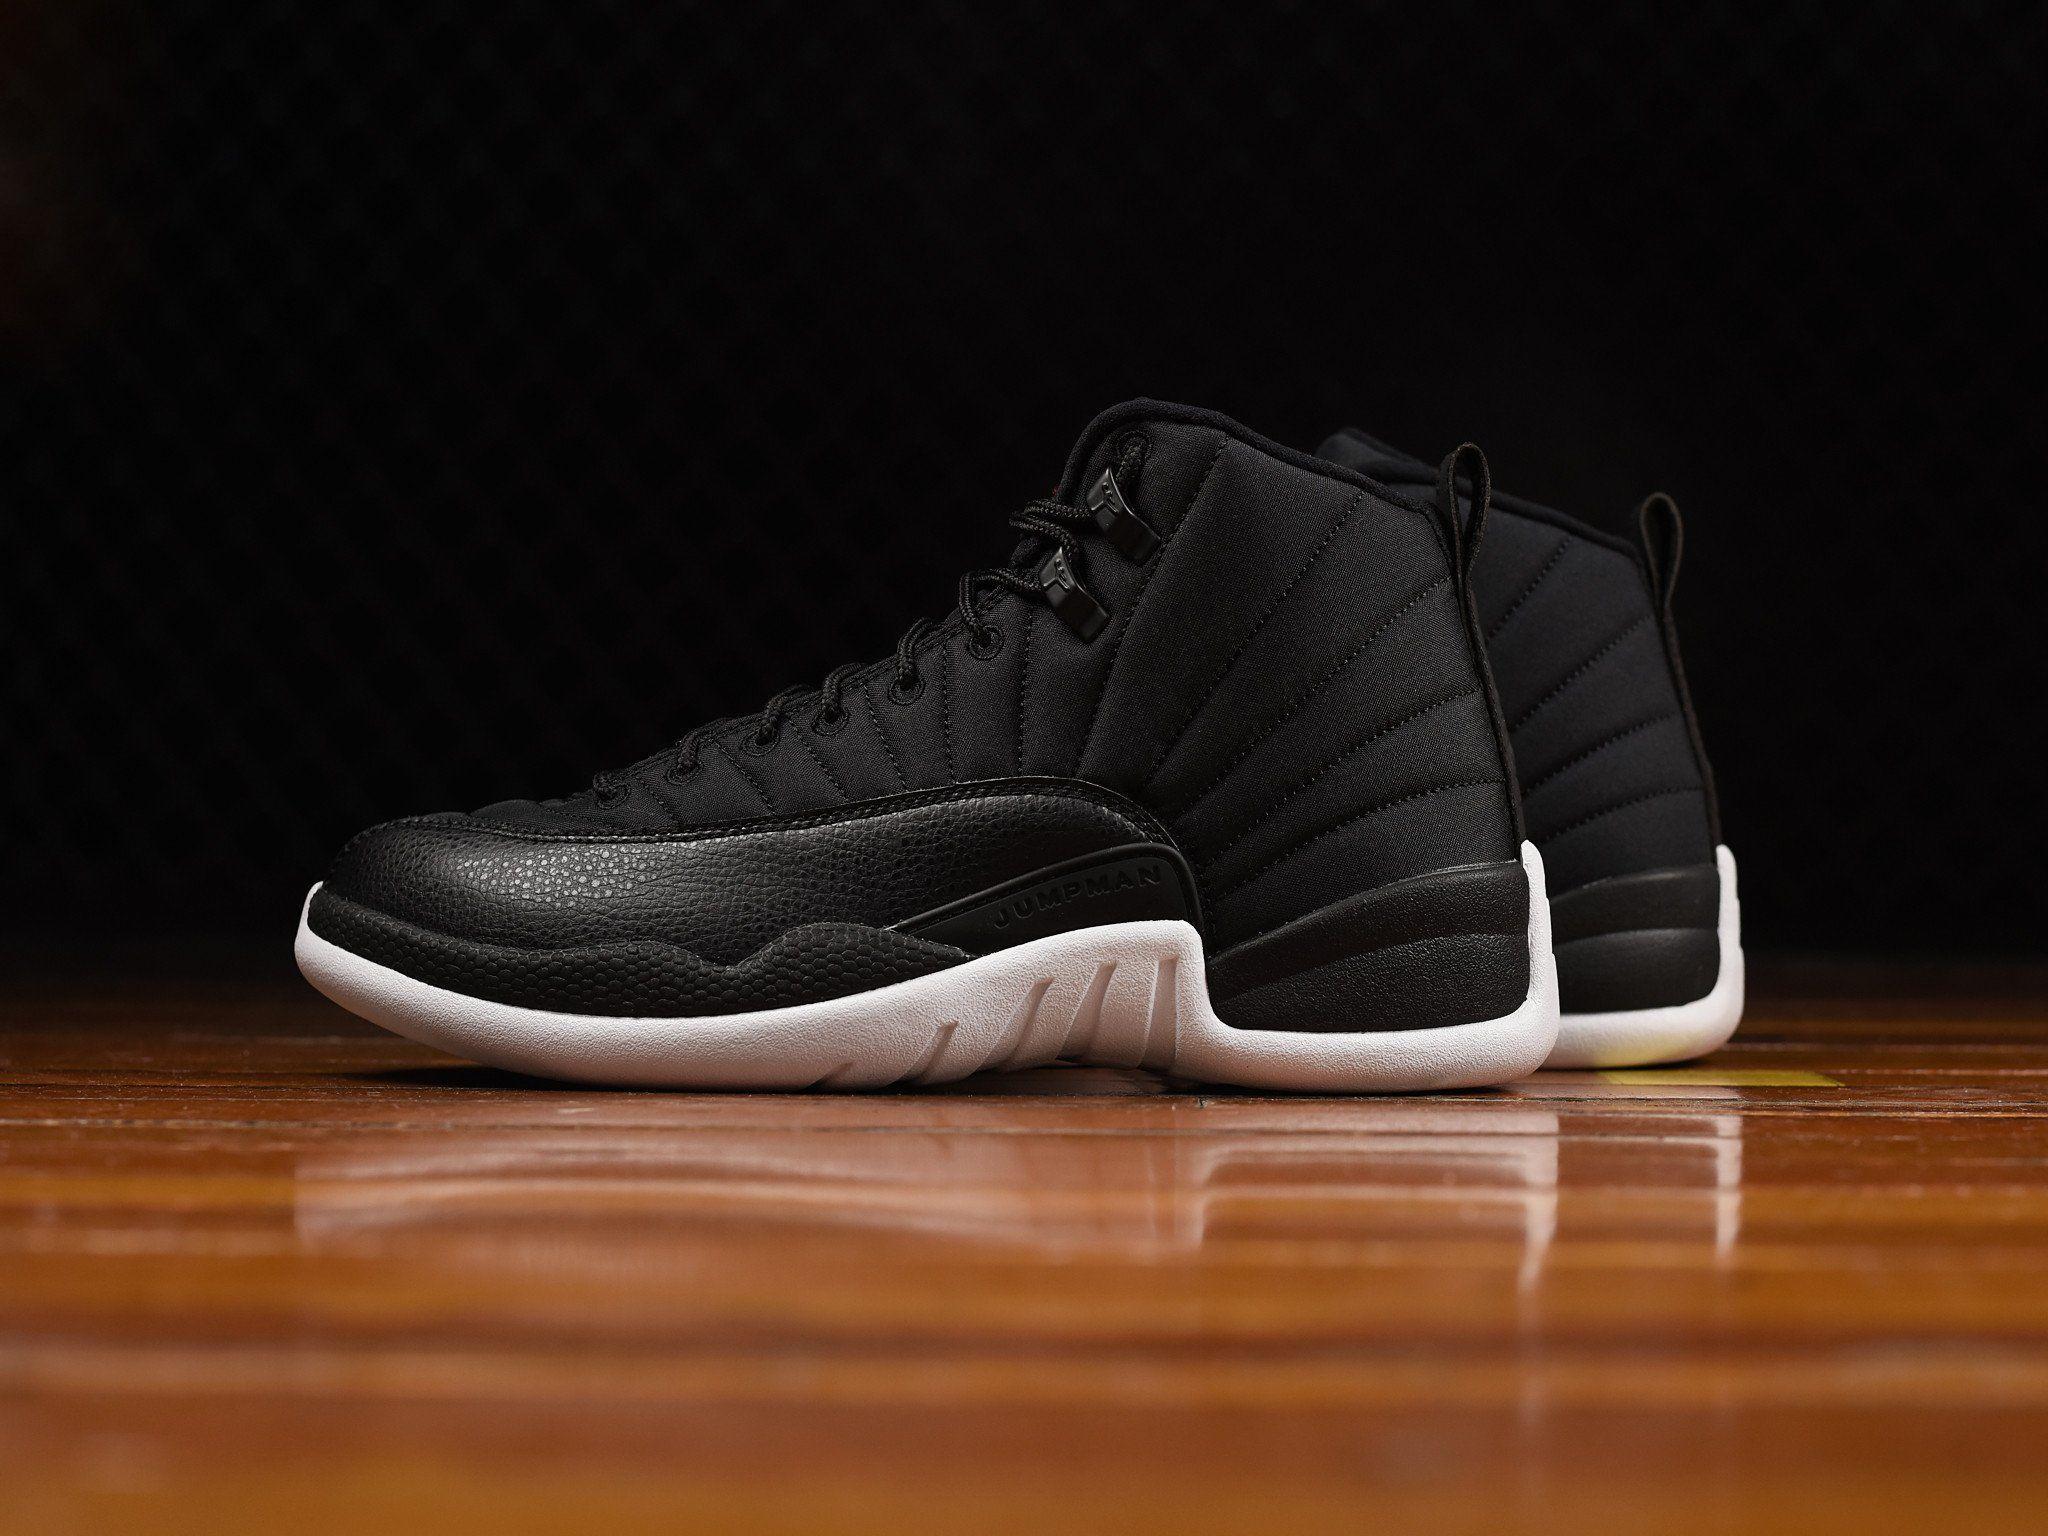 Are You Looking Forward To The Air Jordan 12 Black Nylon This